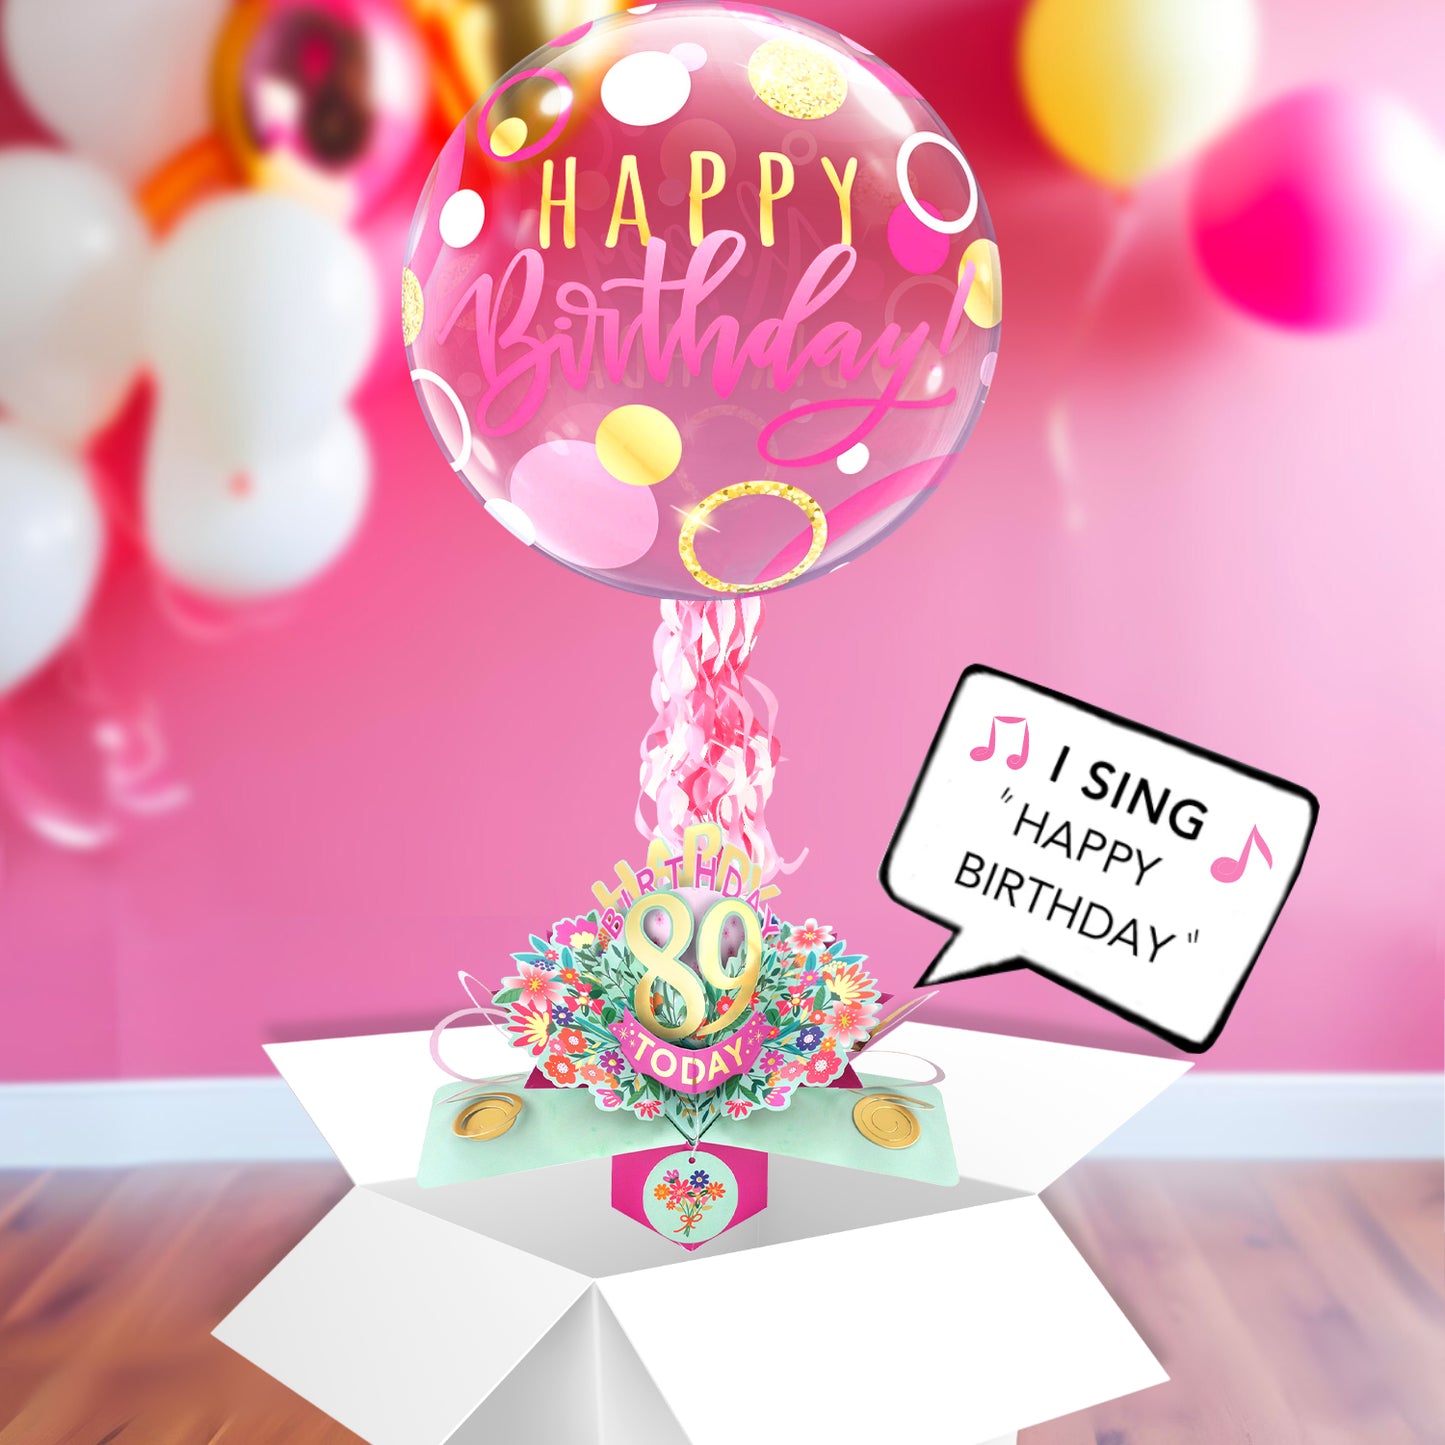 89th Birthday Pop Up Card & Musical Balloon Surprise Delivered In A Box For Her